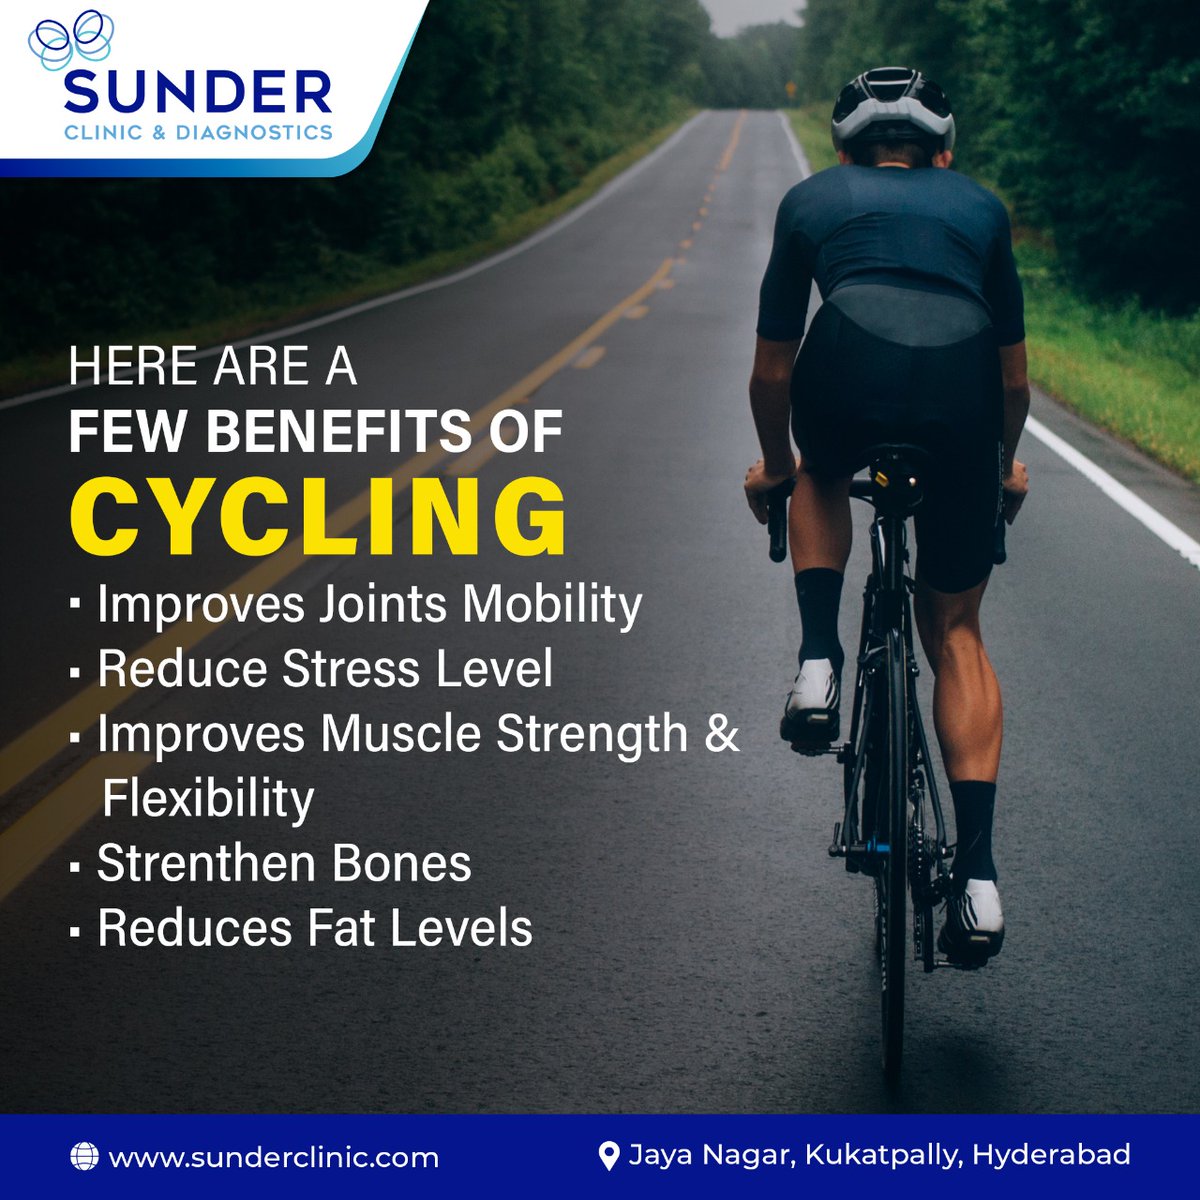 Exercise on the bike for at least 30 minutes a day will increase your cardiovascular and muscular endurance.
#cycling #cyclingbenefits #physicalexercise #physicalfitness #sunderphysiotherapy #sunderclinic #kukatpally #hyderabad